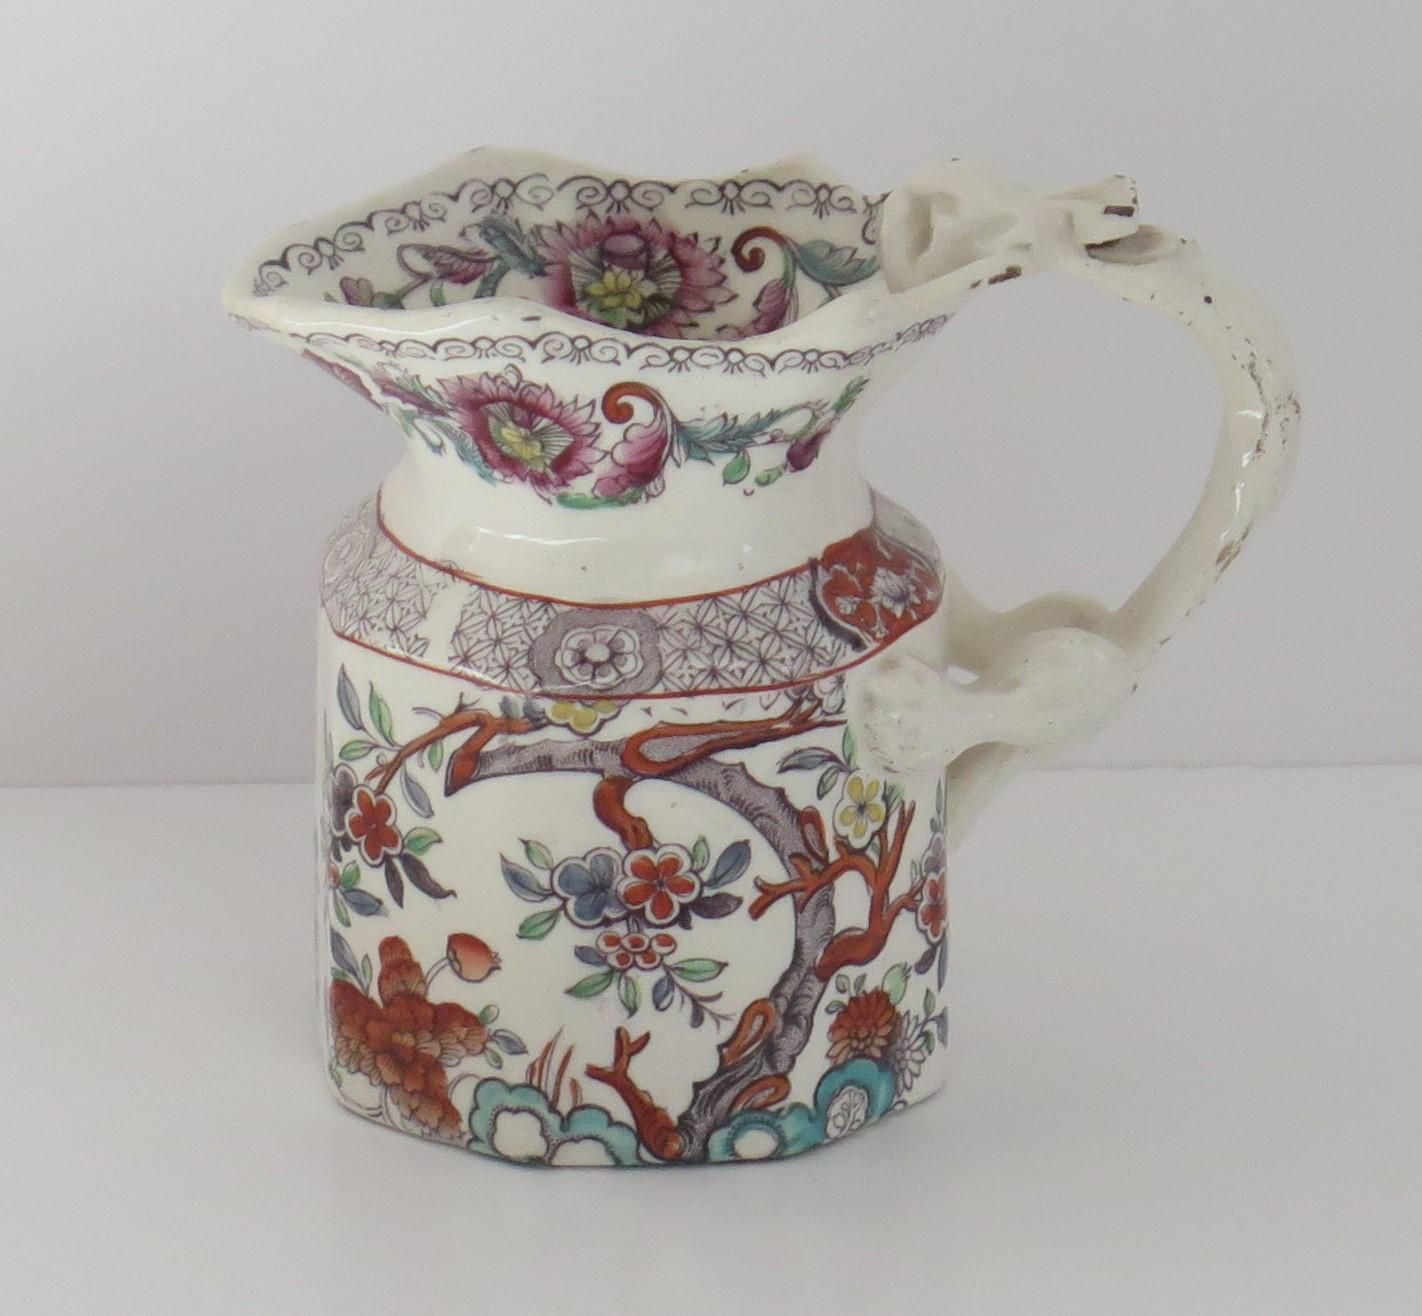 This is a good ironstone pottery jug or pitcher made by Mason's, of Lane Delph, Staffordshire, England, circa 1840. The shape, pattern and base markings are all rare. 

This jug has the rarer hexagonal Fenton shape with a dragon loop handle. The